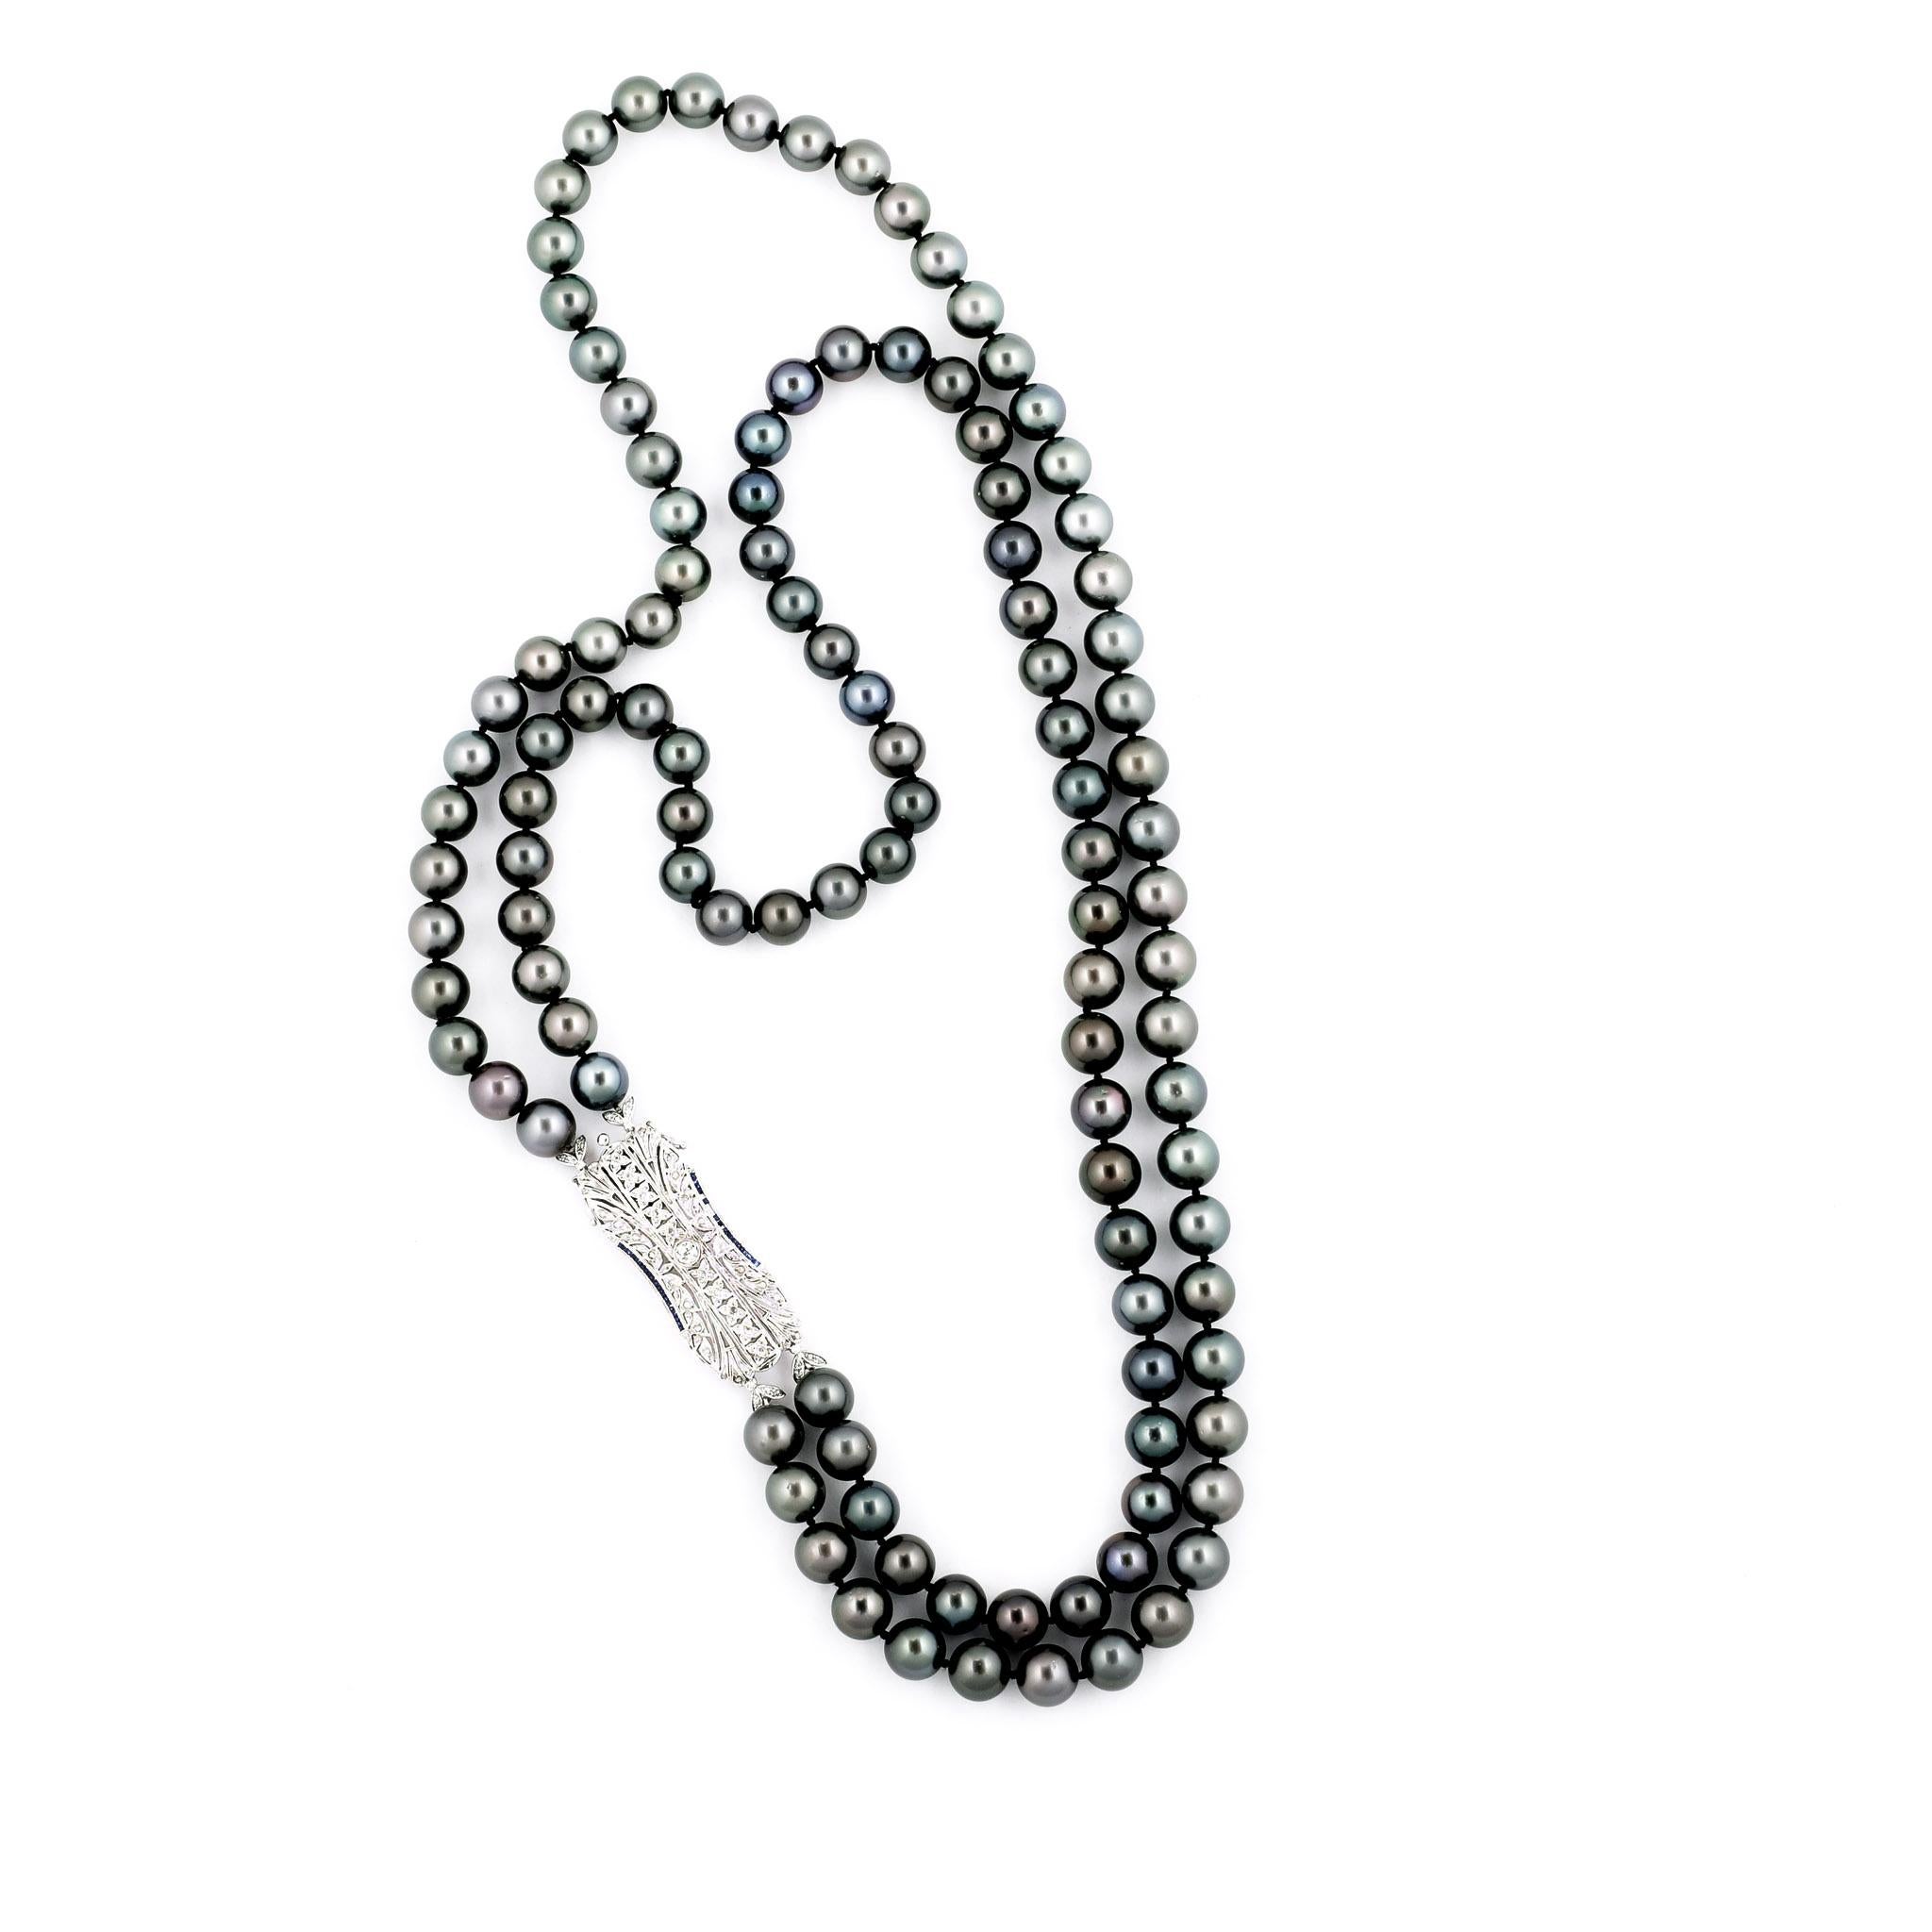 This stunning necklace is compromised of 112 outstanding approx. 12 mm high quality Tahitian pearls. 
It is set with an Art Deco Style 18k white gold clasp embellished with 1 carat of Round brilliant cut diamonds and mixed cut blue sapphire. Pearls